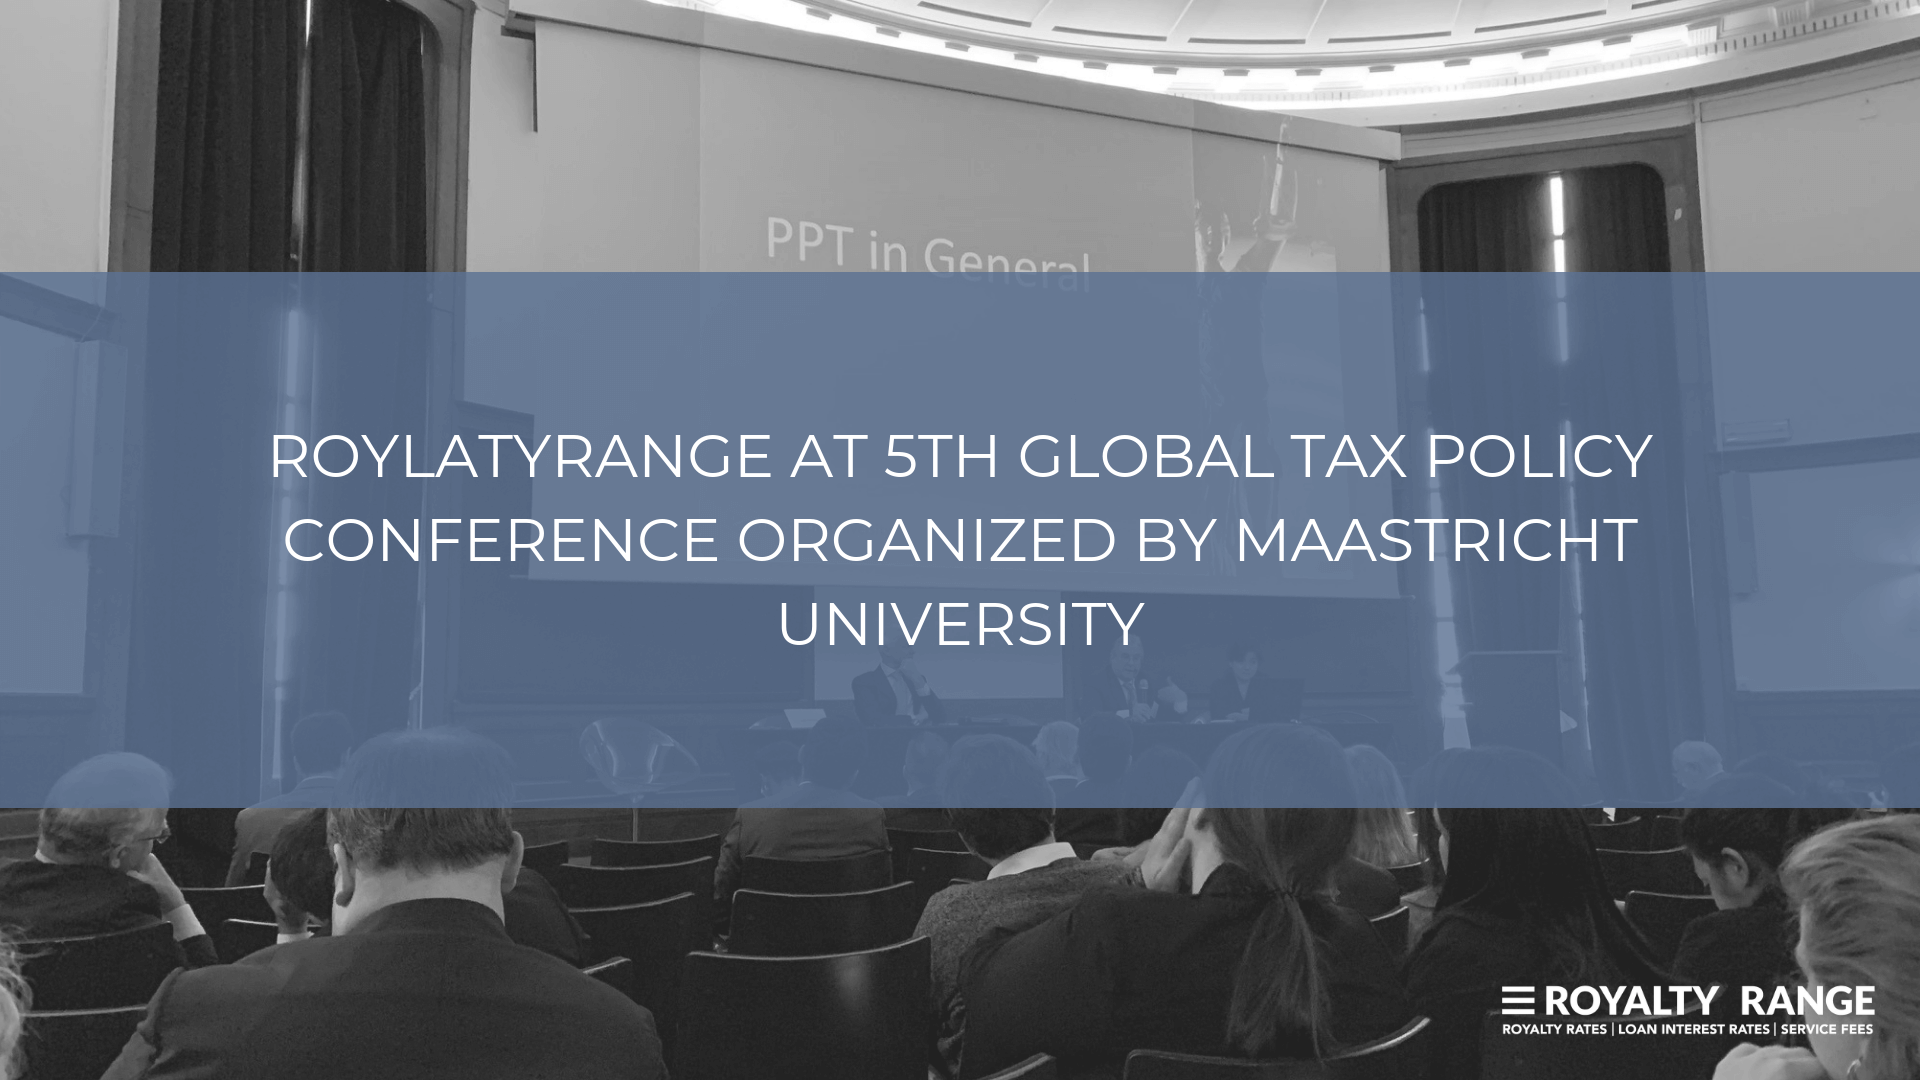 ROYLATYRANGE AT 5TH GLOBAL TAX POLICY CONFERENCE ORGANIZED BY MAASTRICHT UNIVERSITY (1)